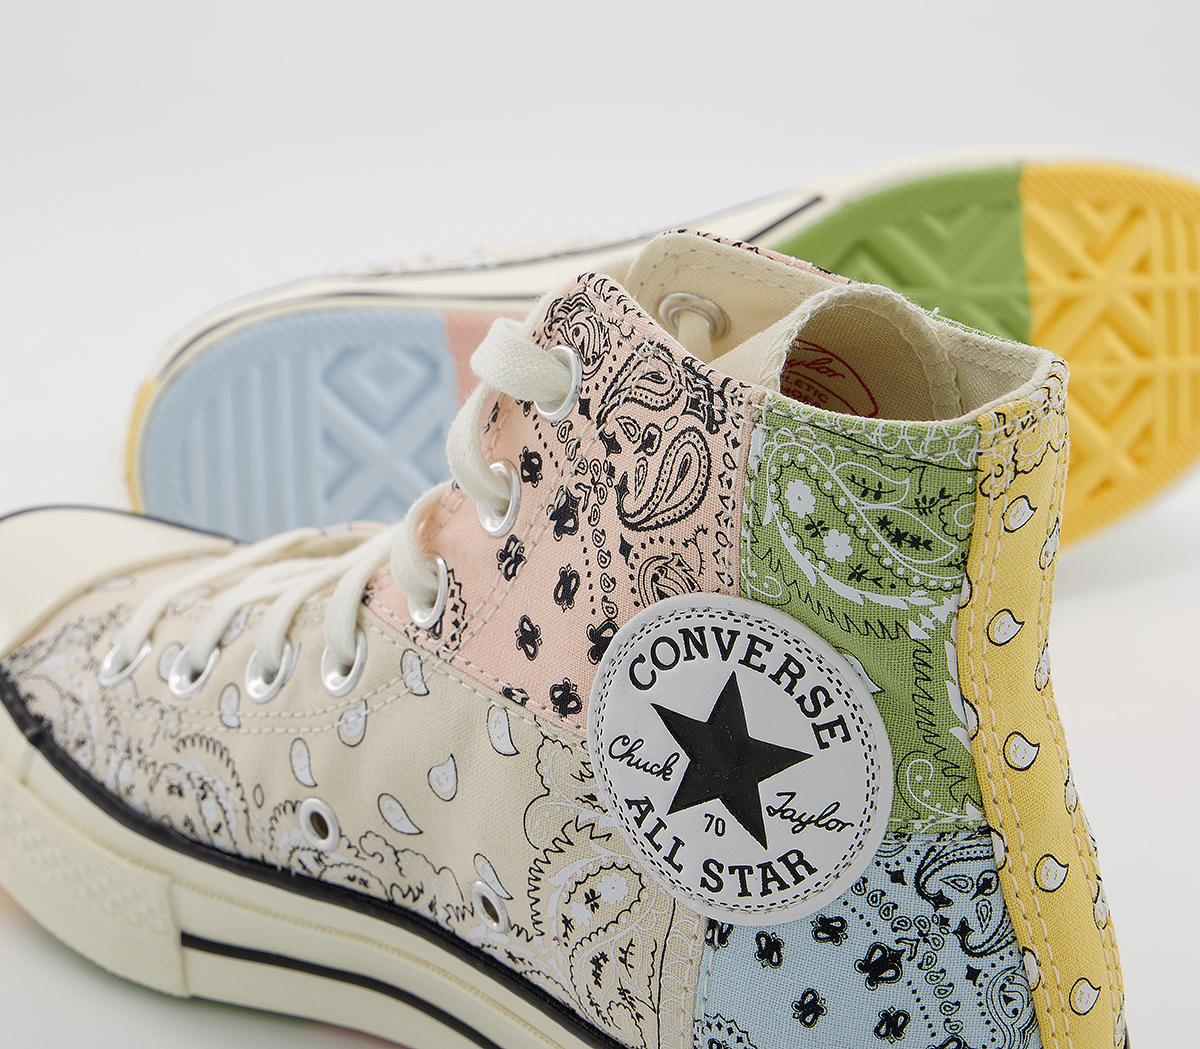 Converse All Star Hi 70s Trainers Natural Ivory Paisley - Unisex Sports